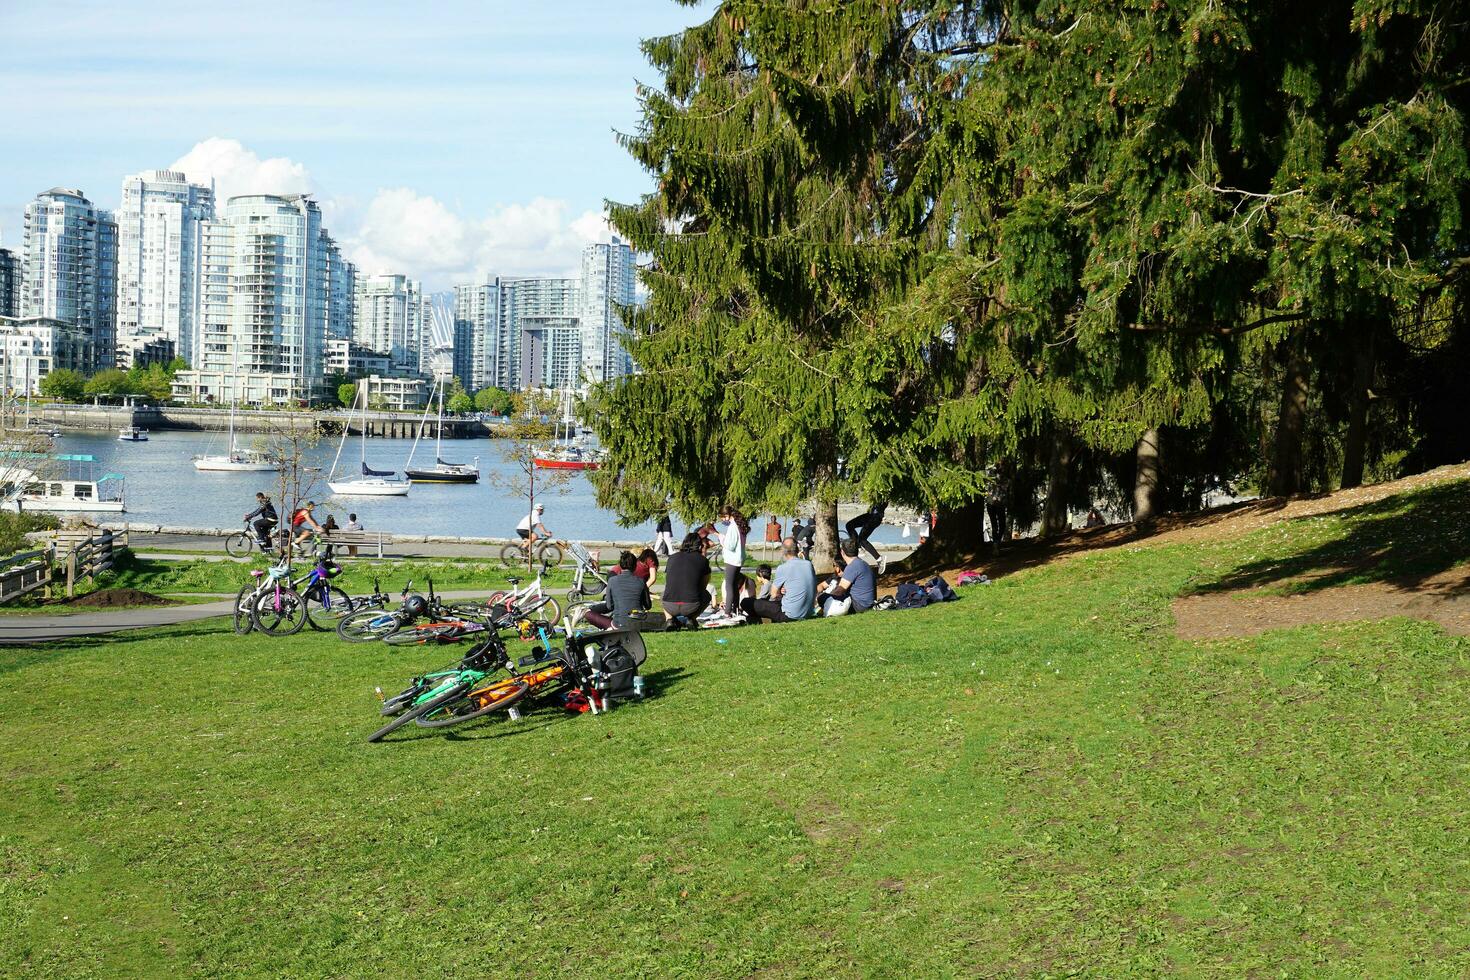 People enjoying a sunny spring day near the water in the park, with a stunning cityscape in the background. Vancouver, BC, Canada. May 02, 2021. photo